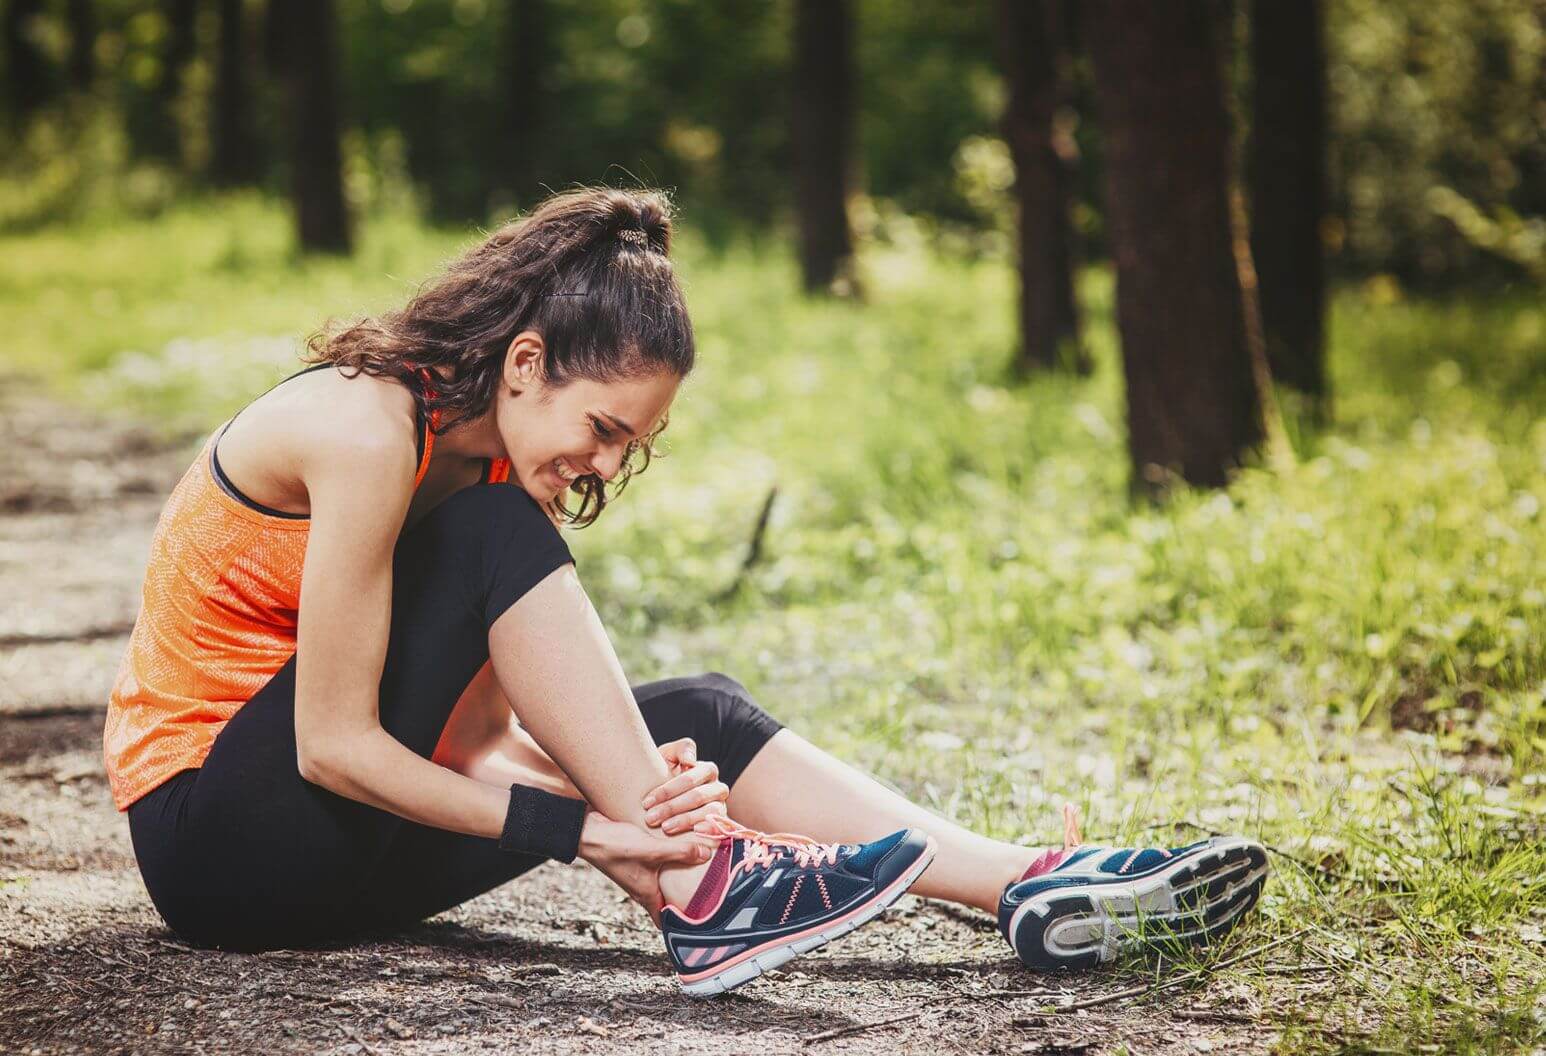 can physio help with sprains and strains